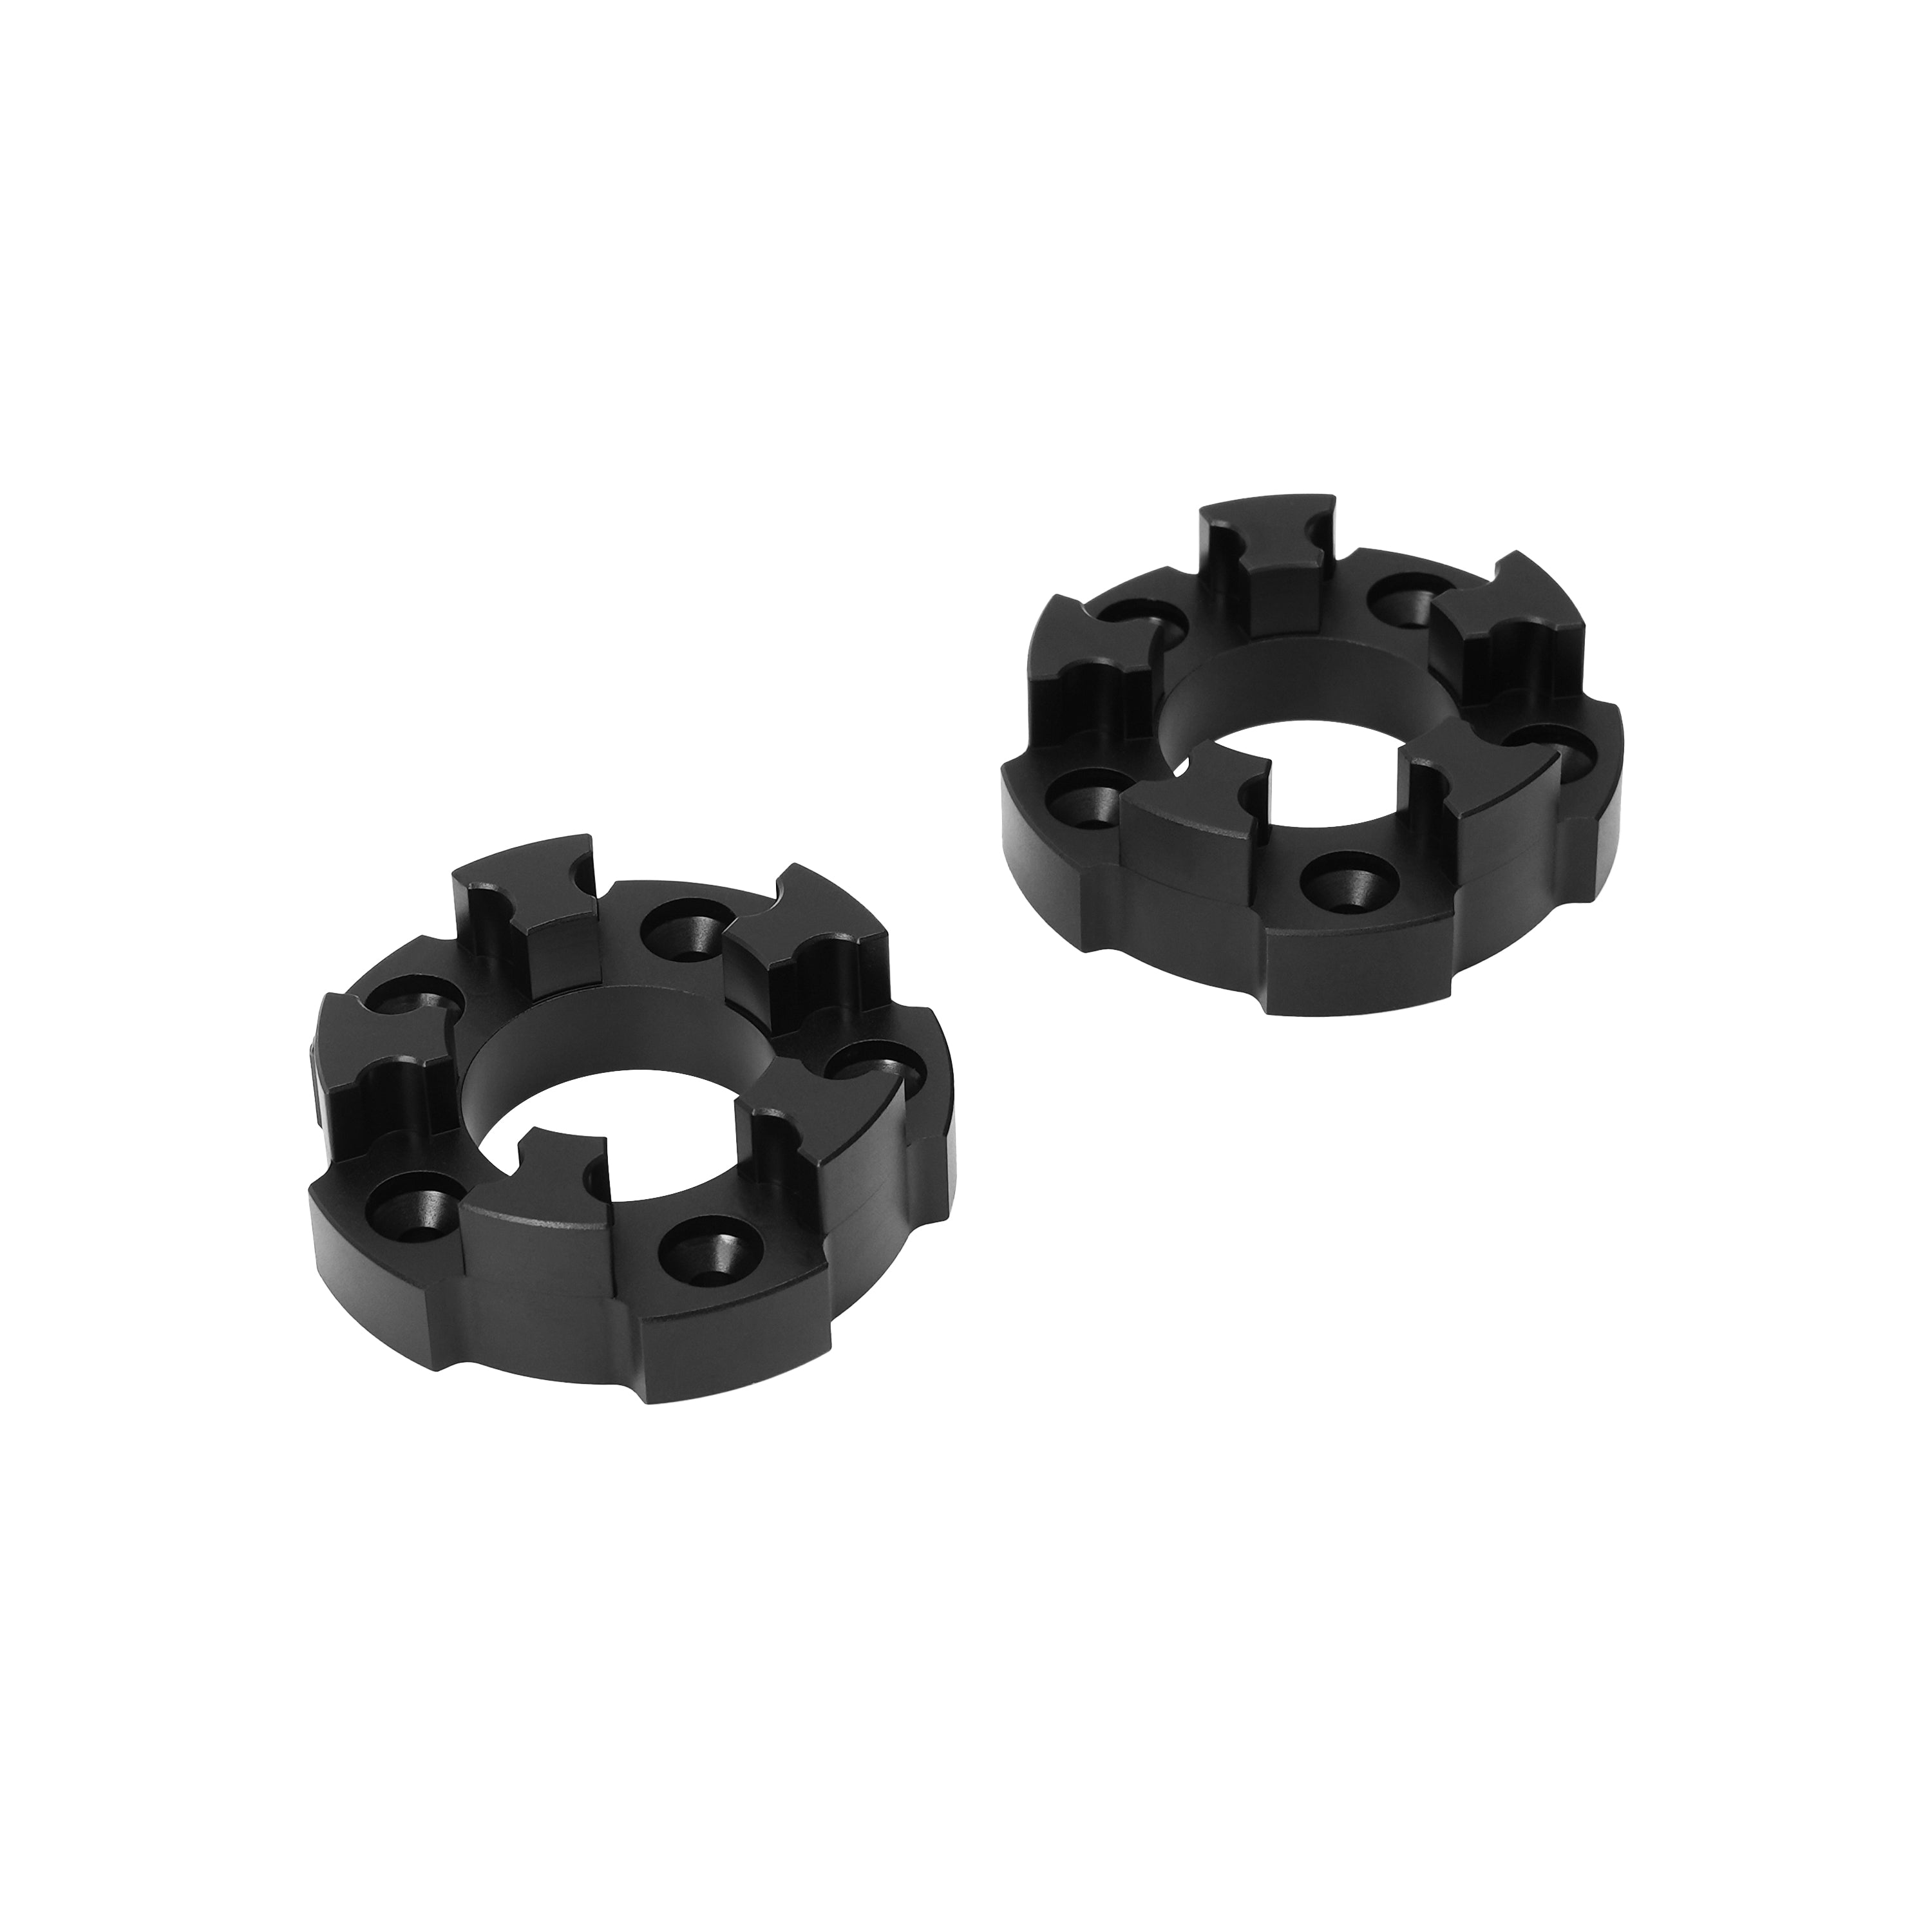 Gear Drive Wheel Adapter for Exway Precision Hubs